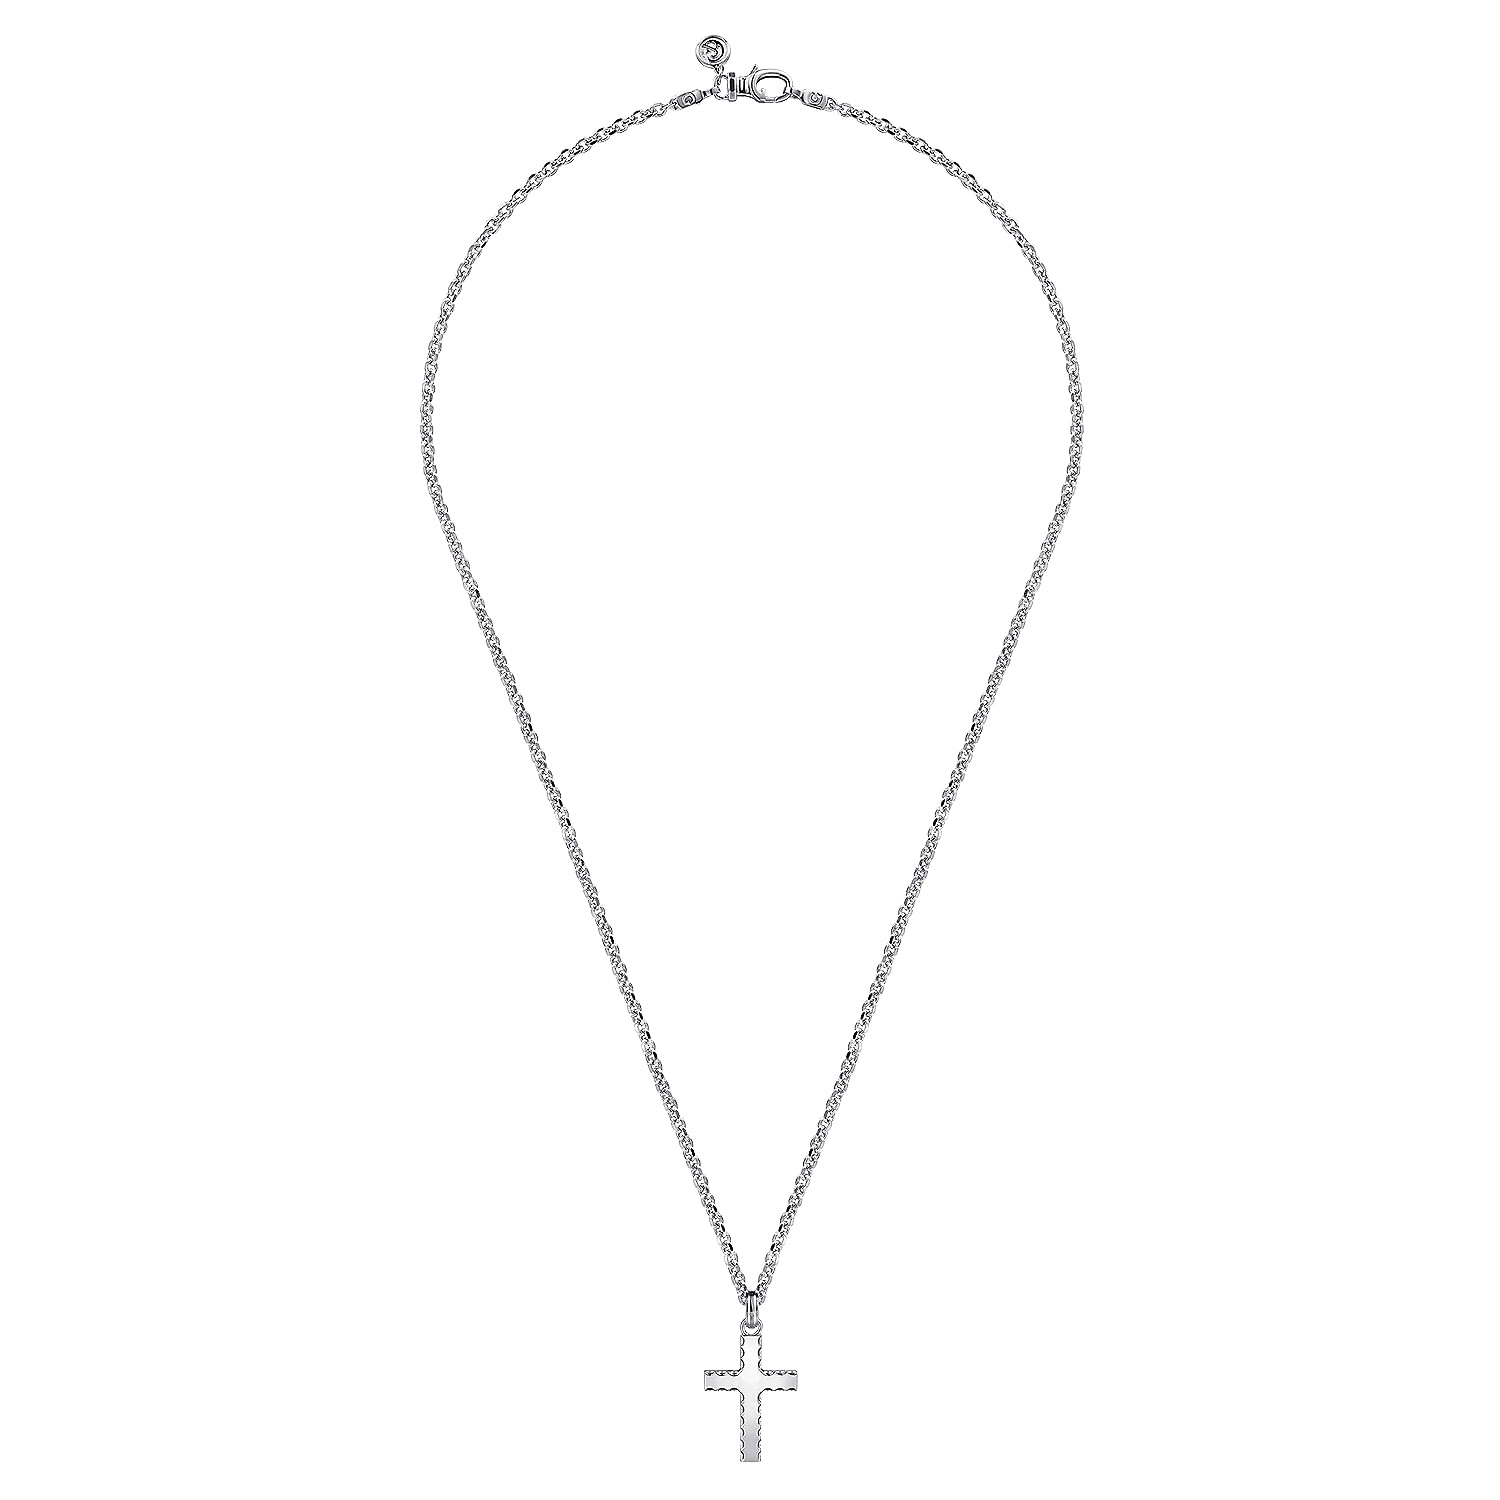 22 Inch 925 Sterling Silver Cross Link Chain Necklace with Beveled Trim